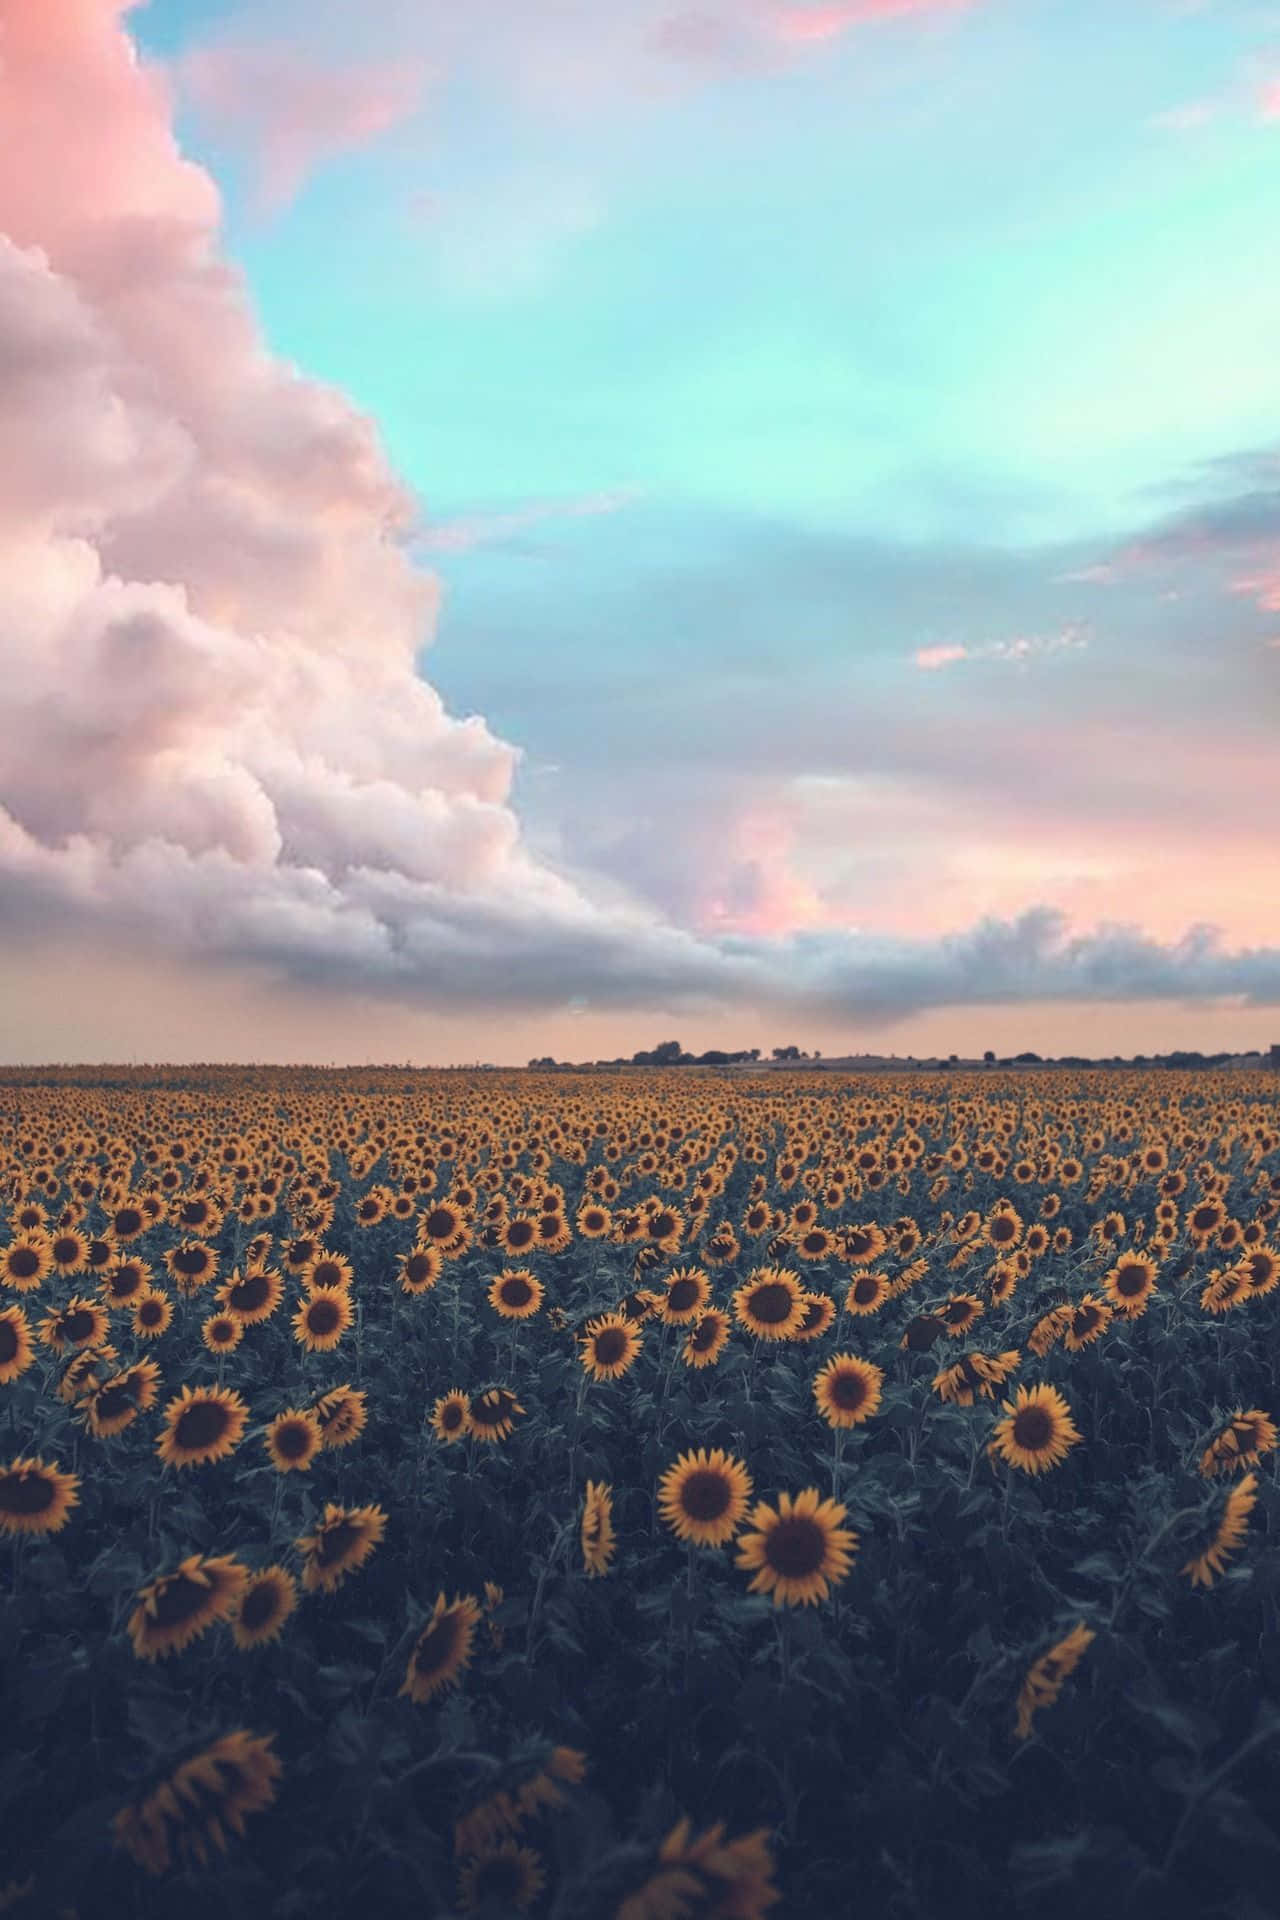 Aesthetic Nature With A Sunflower Field Wallpaper